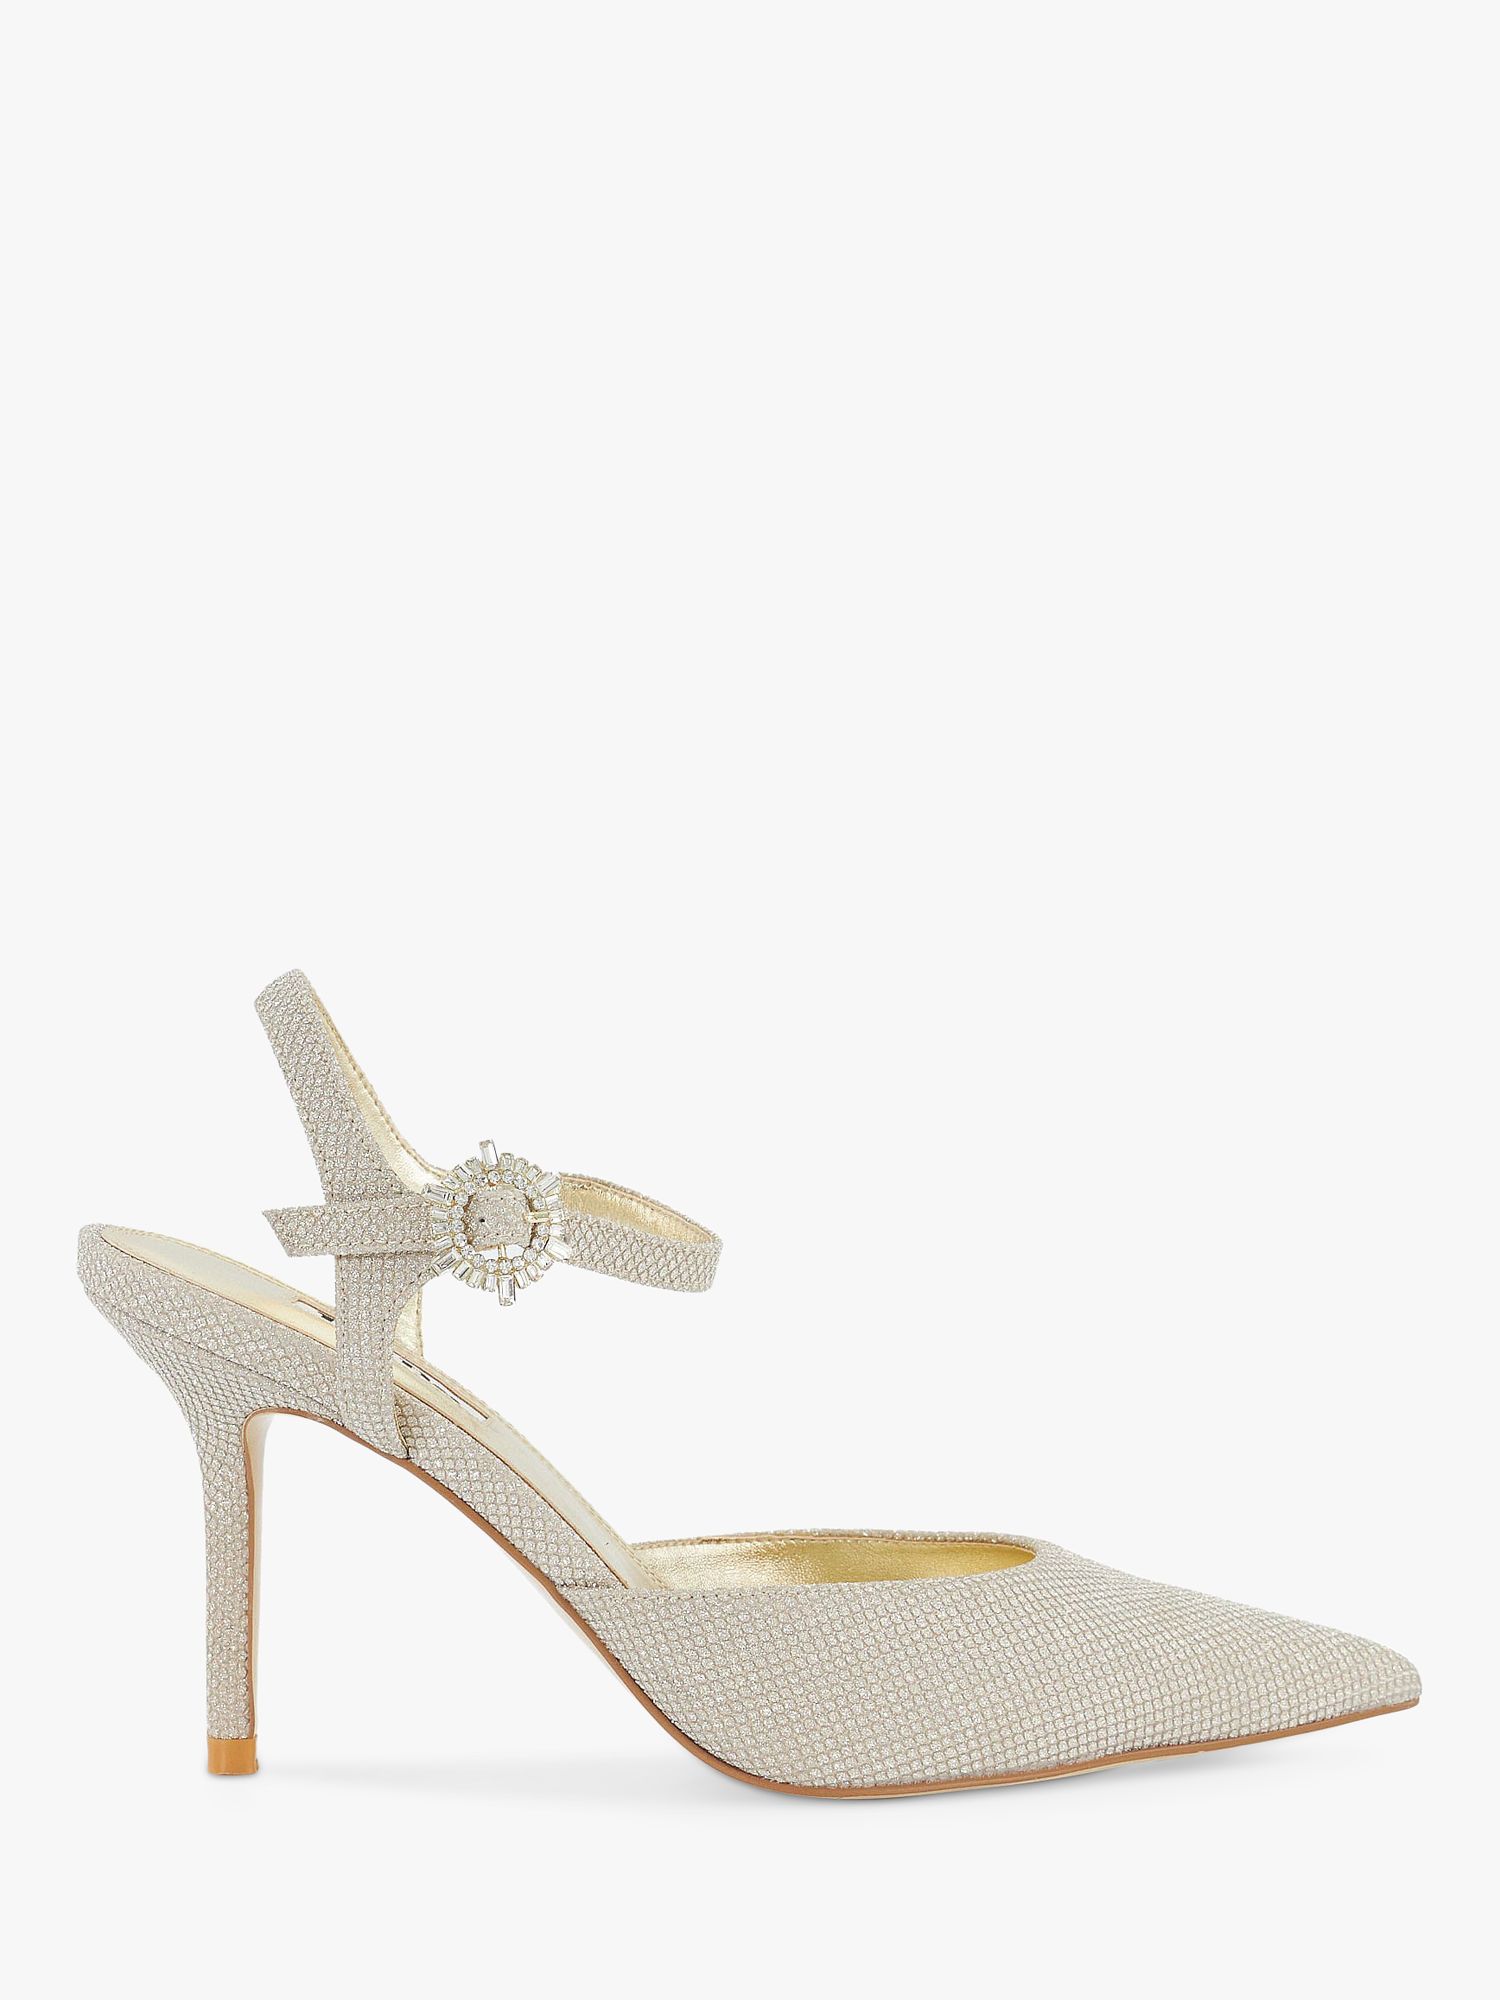 Dune Channel Slingback Court Shoes, Gold at John Lewis & Partners